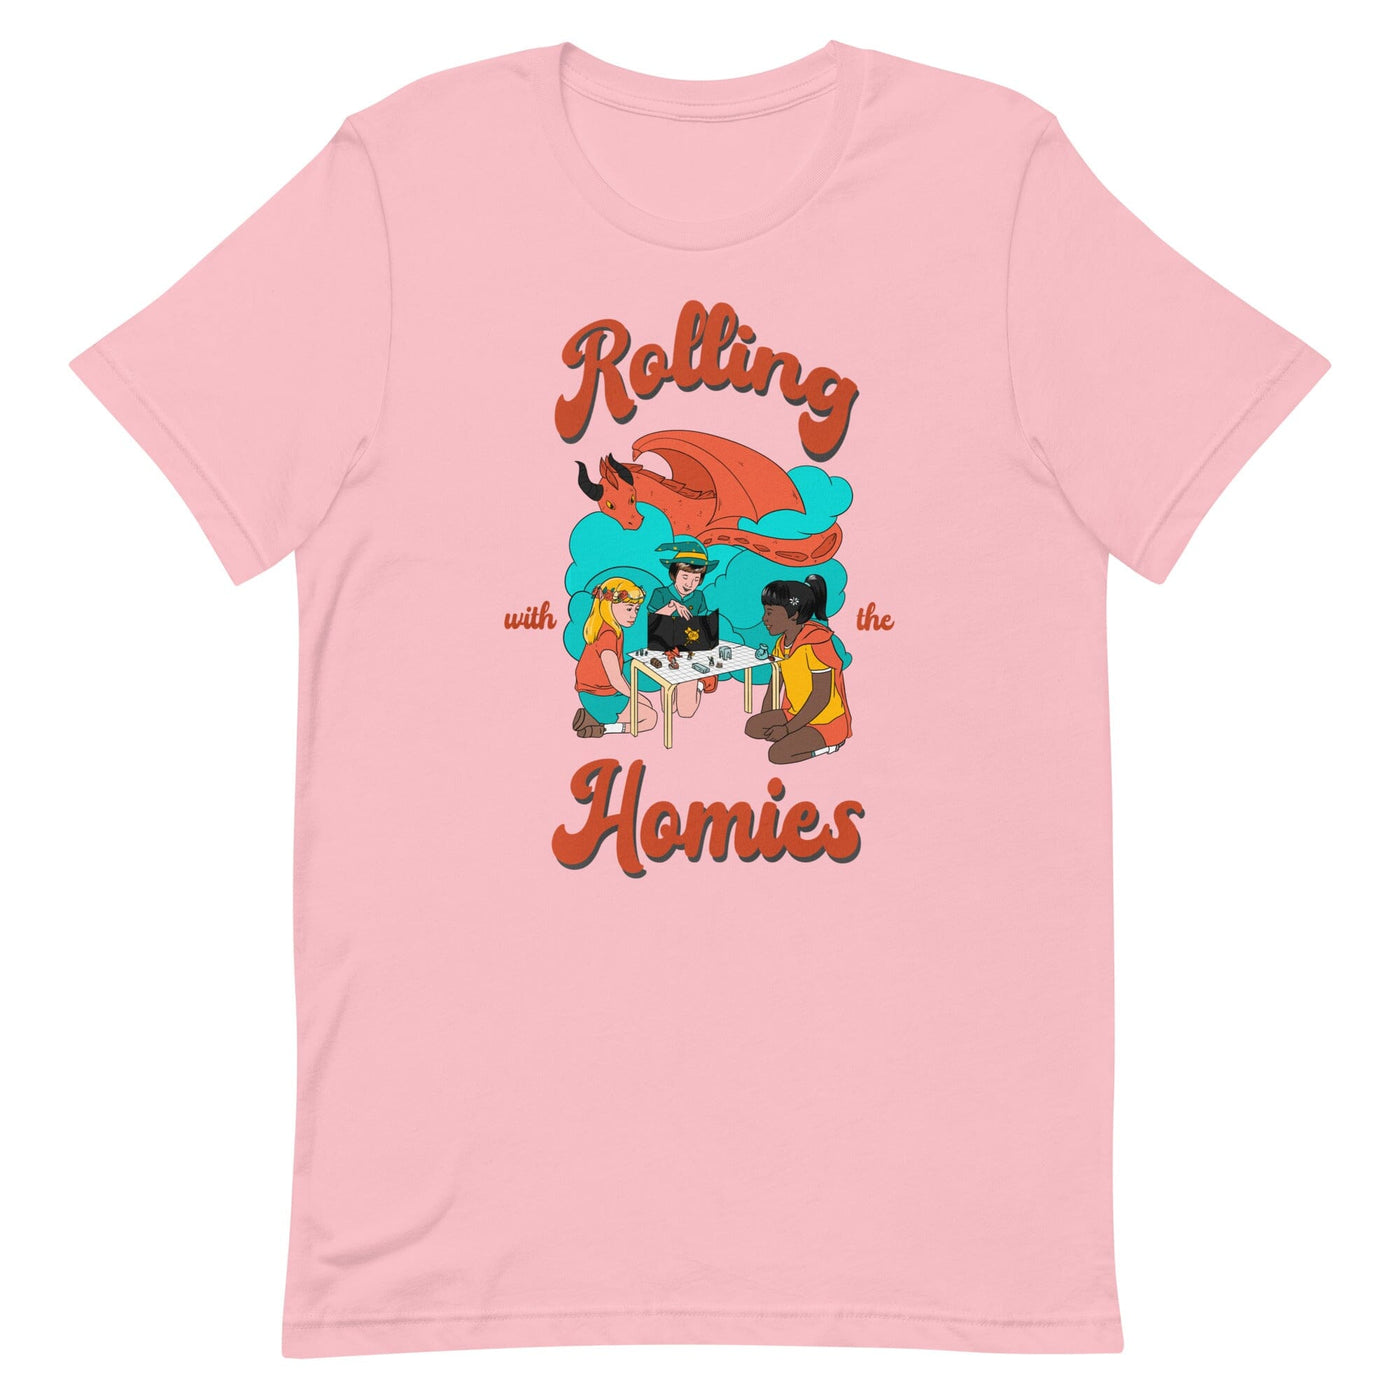 Rolling with the Homies | Unisex t-shirt | Retro Gaming Threads & Thistles Inventory Pink S 